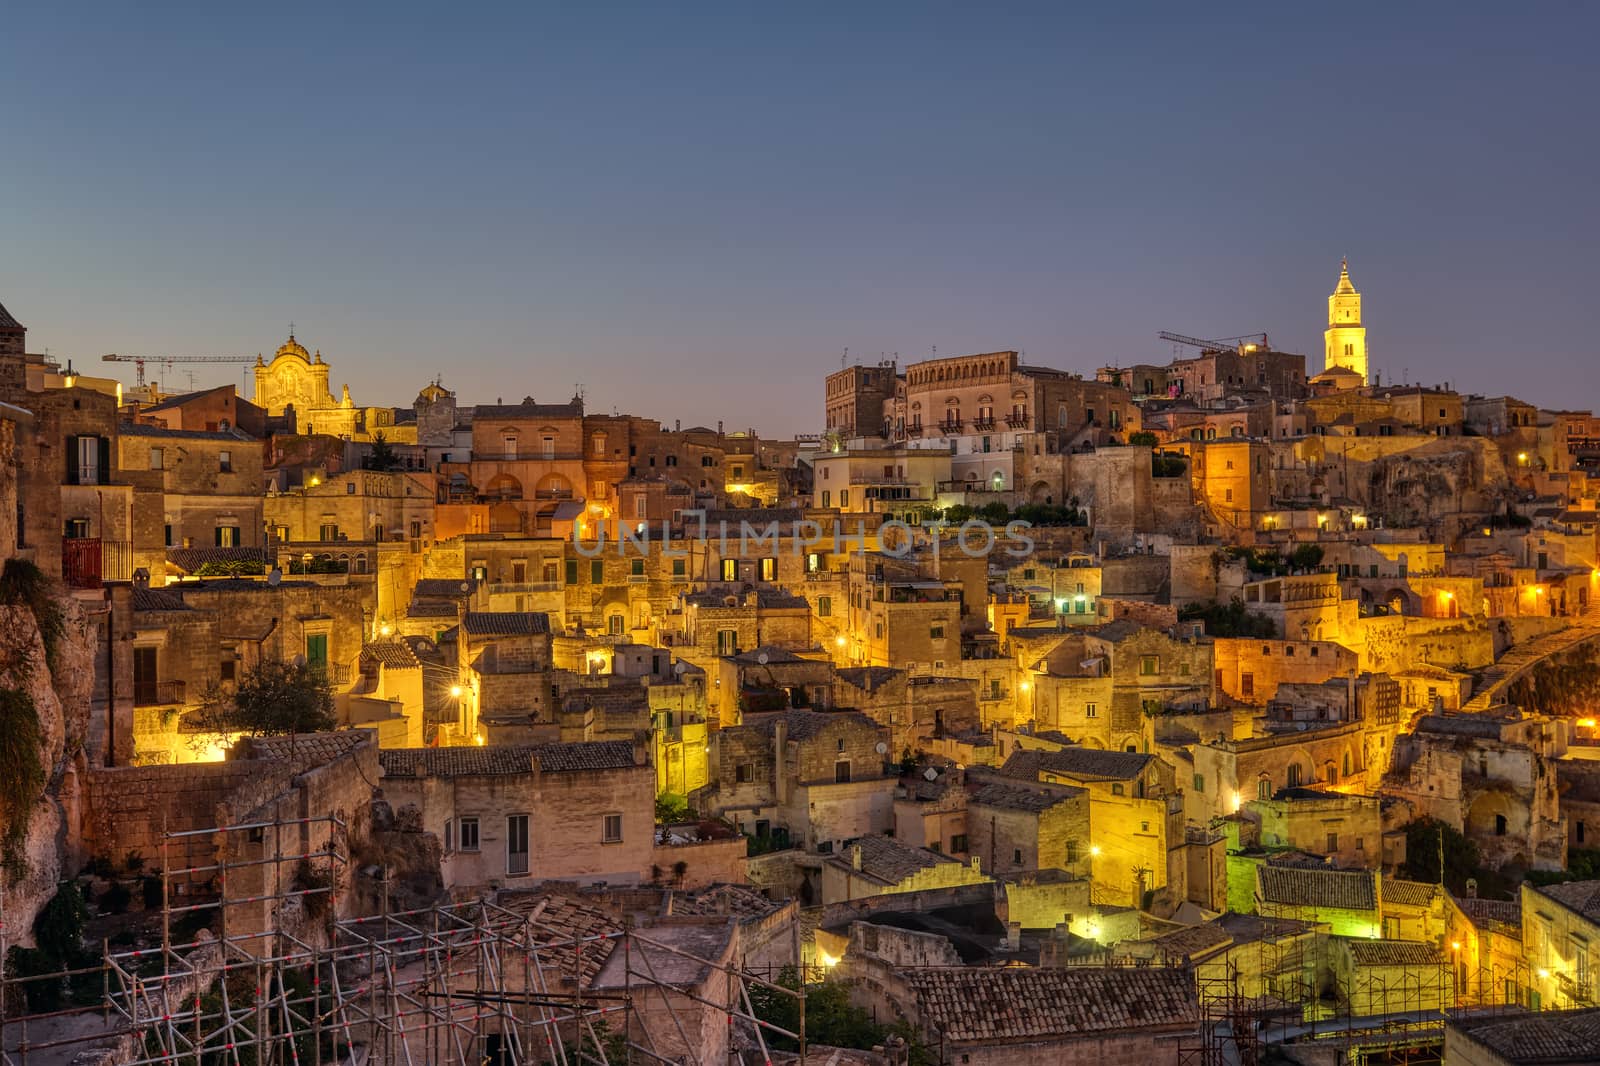 The historic old town of Matera in southern Italy at night